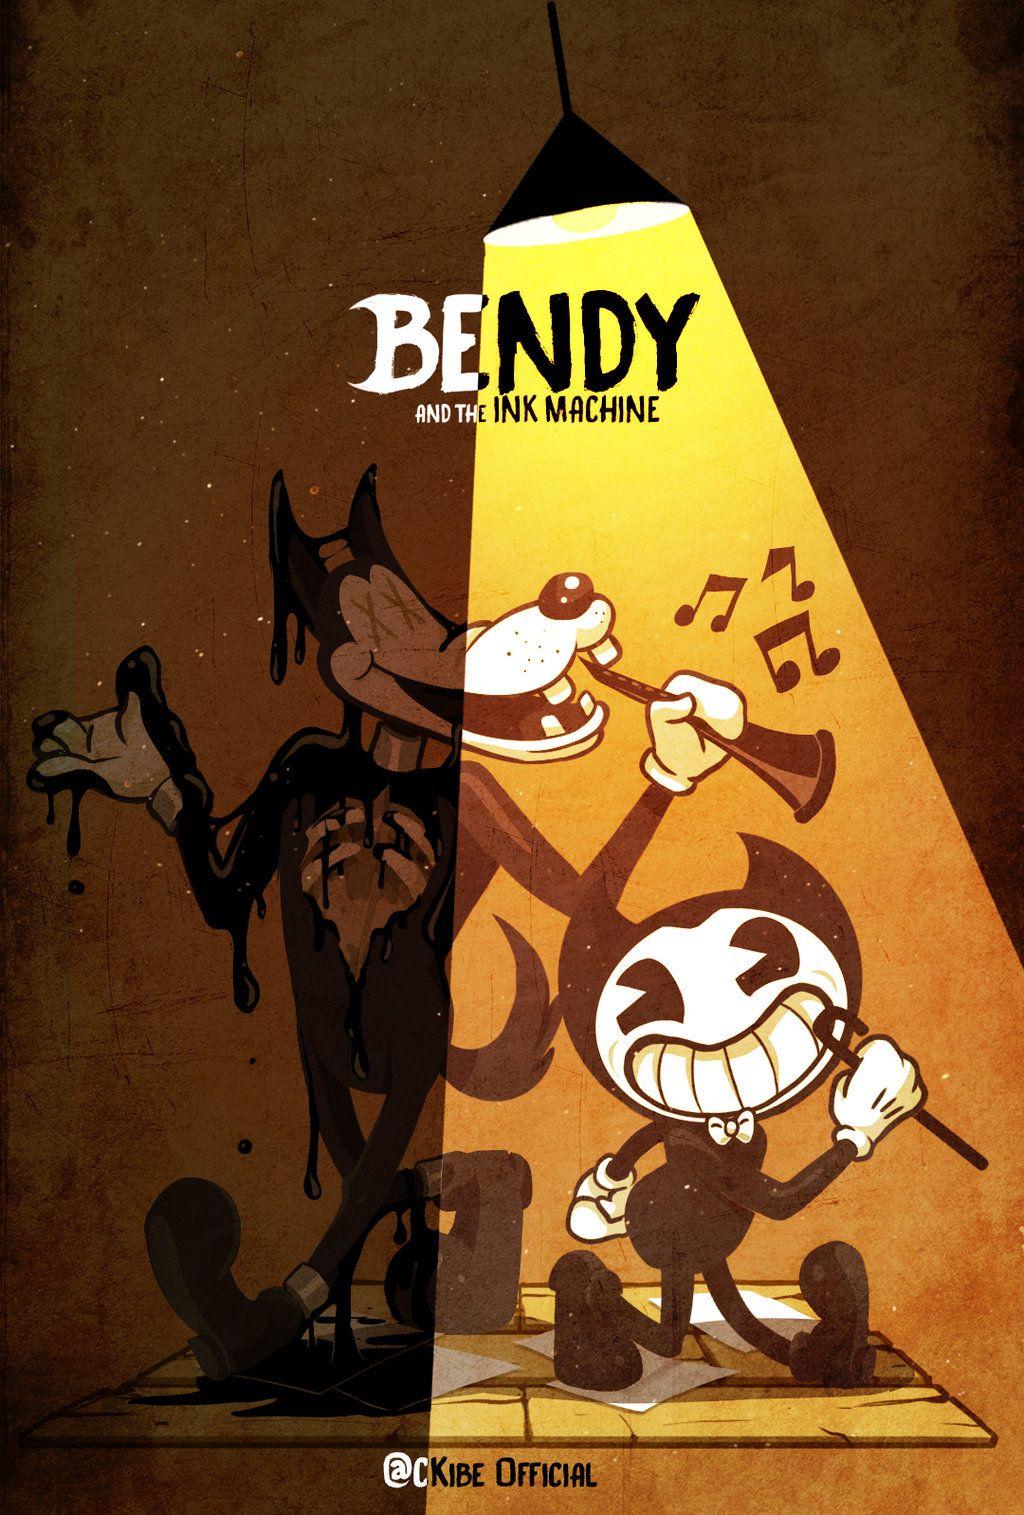 BENDY and the ink machine ANIMATION